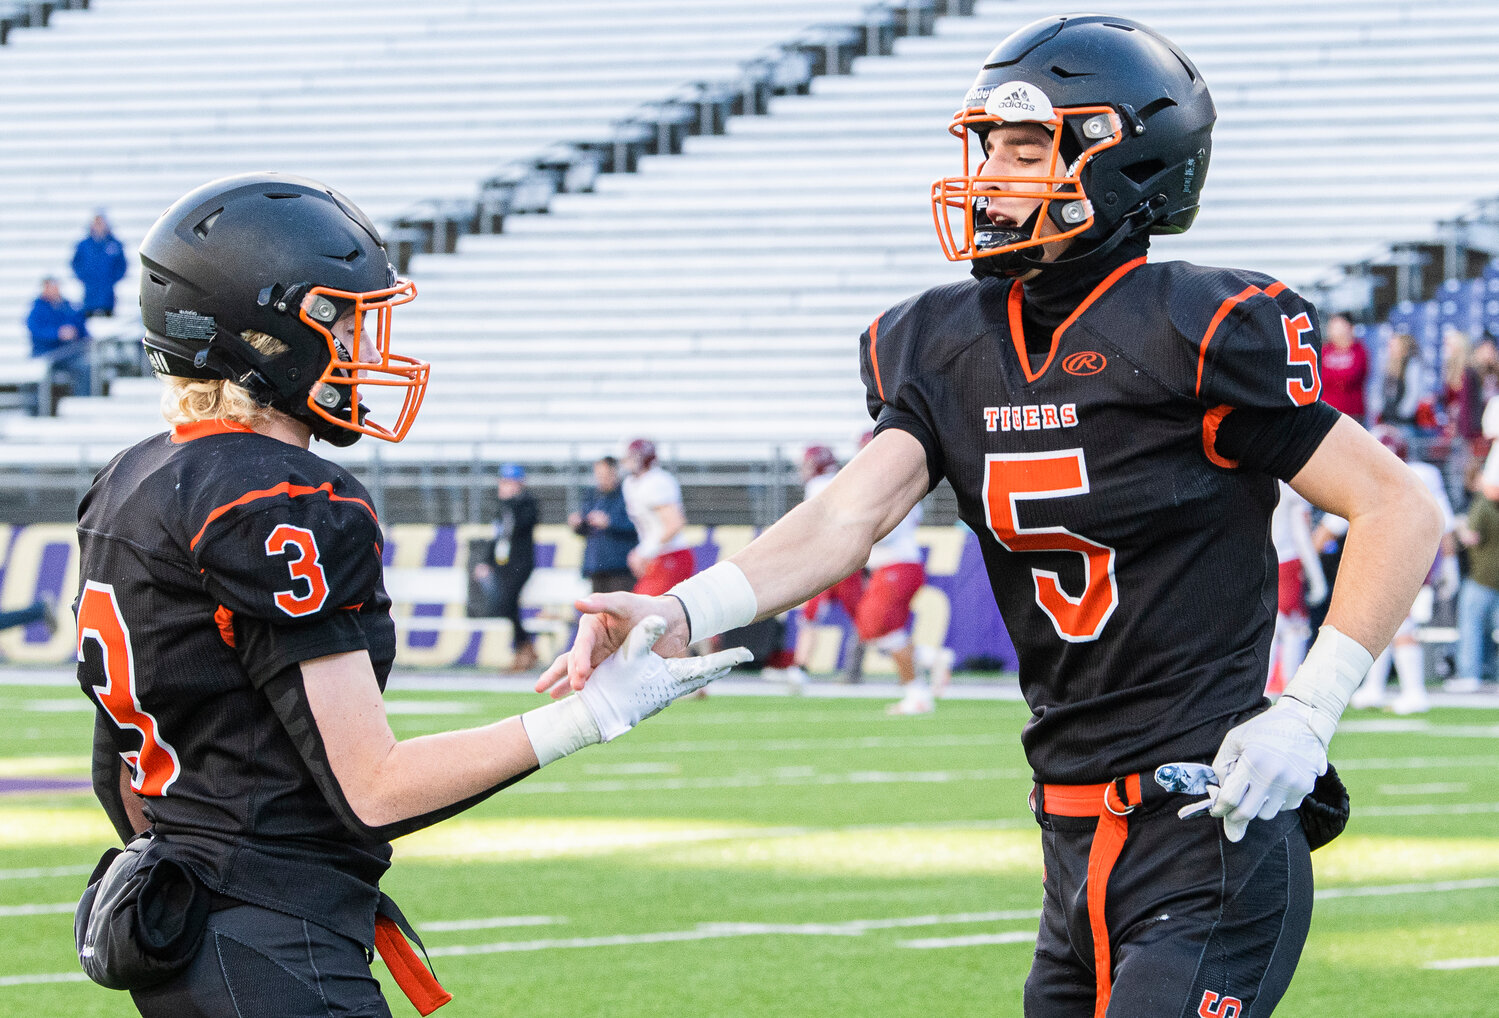 Napavine’s Karsen Denault (5) high-fives Beckett Landram (3) in the 2B State Championship game against Okanogan at Husky Stadium on Saturday, Dec. 2. The matchup is Denault’s first time on the football field since breaking his collarbone five weeks ago.